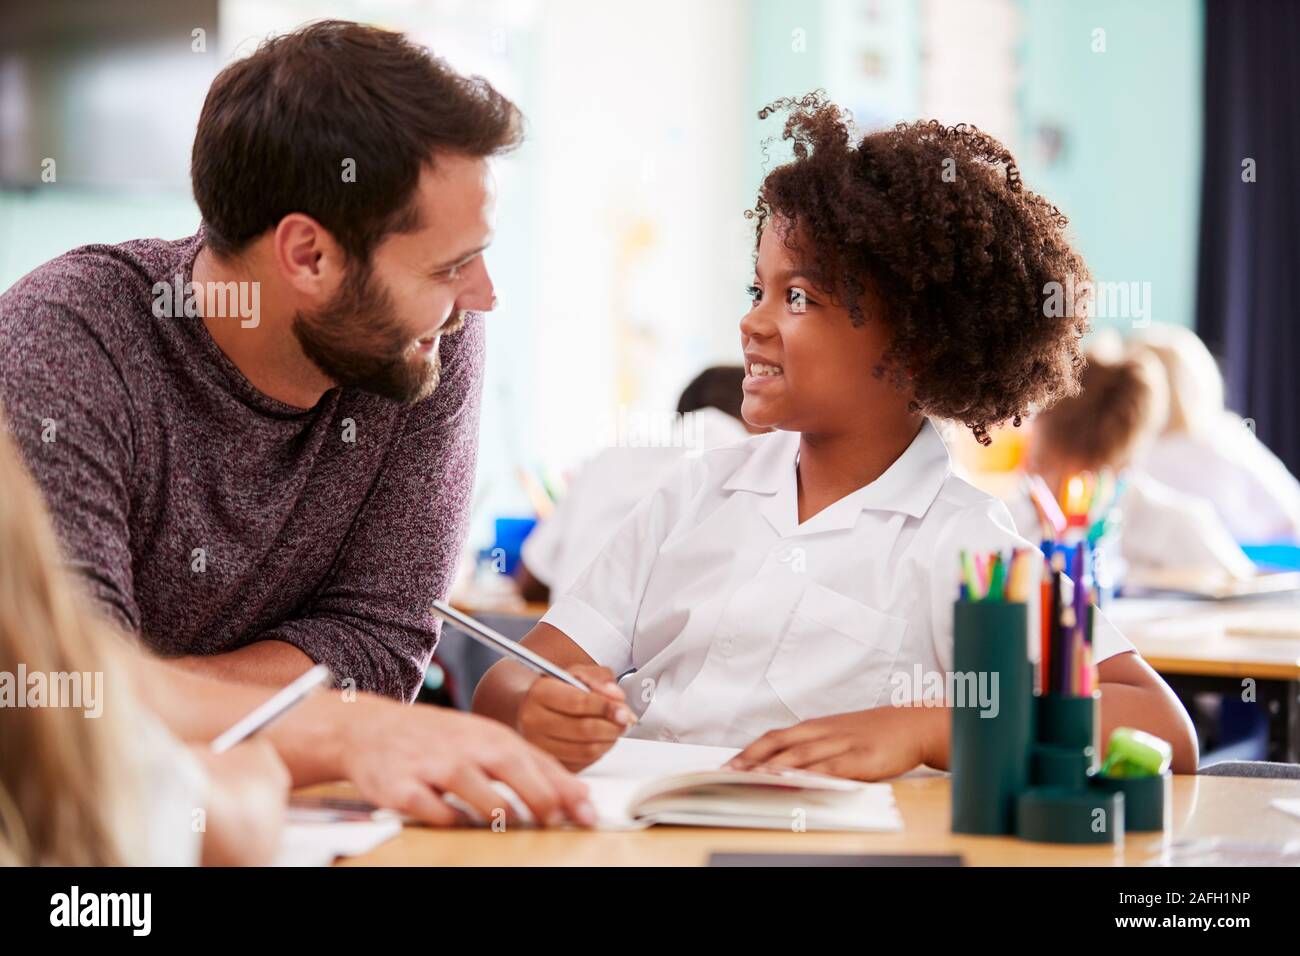 Male Elementary School Teacher Giving Female Pupil Wearing Uniform One To One Support In Classroom Stock Photo